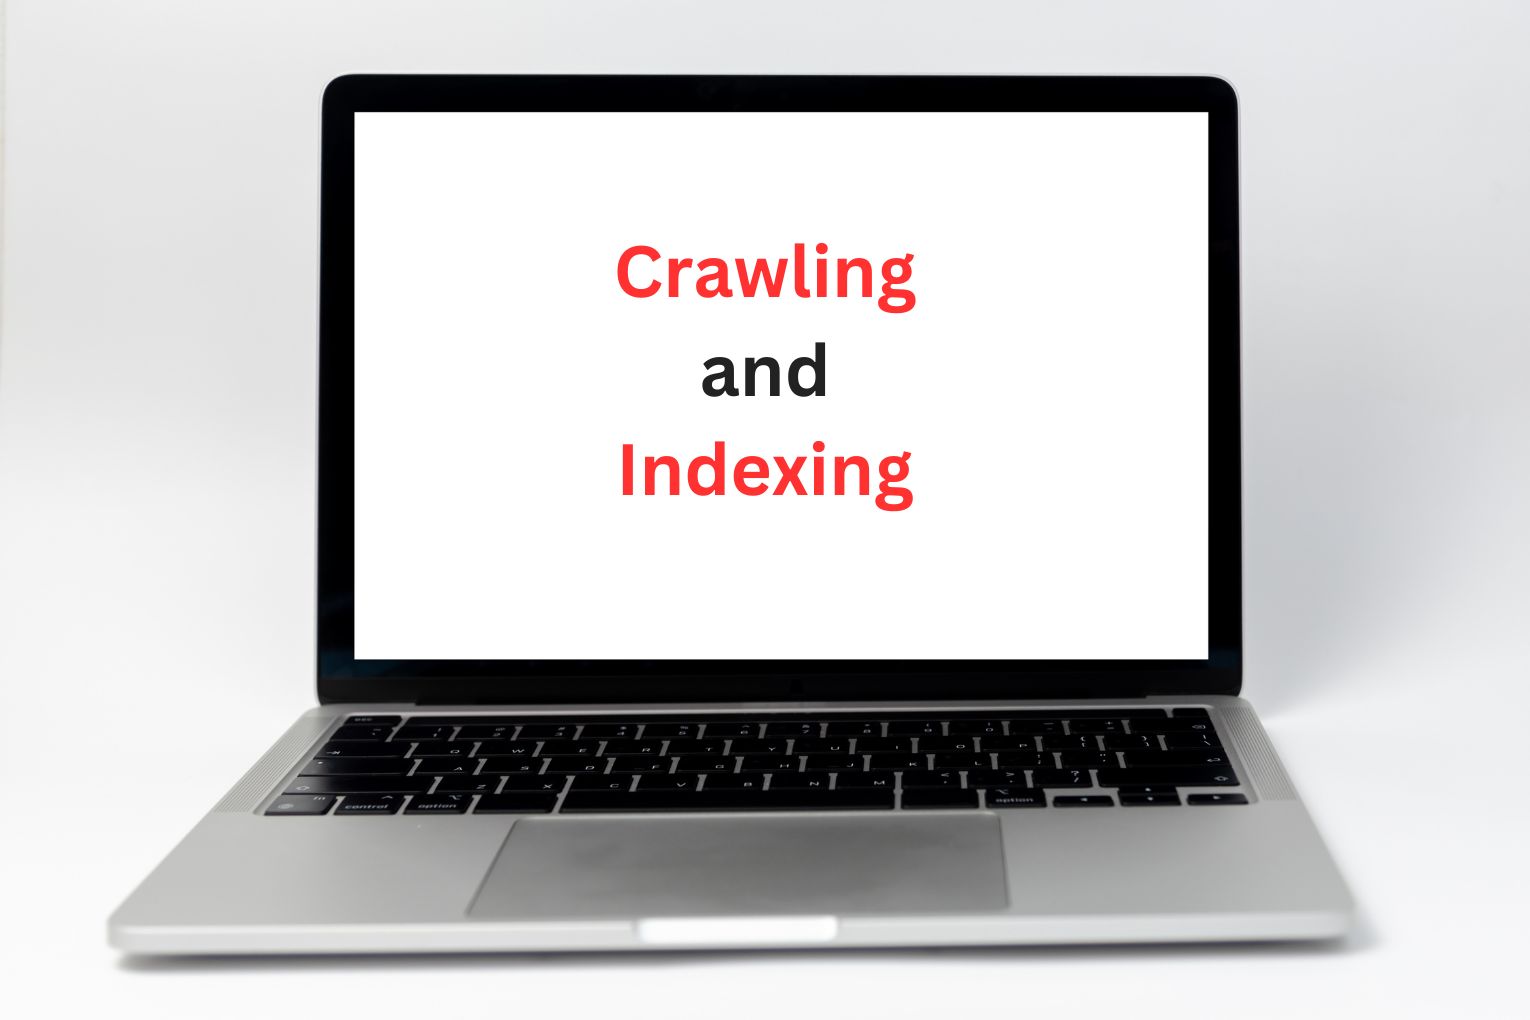 Crawling and Indexing